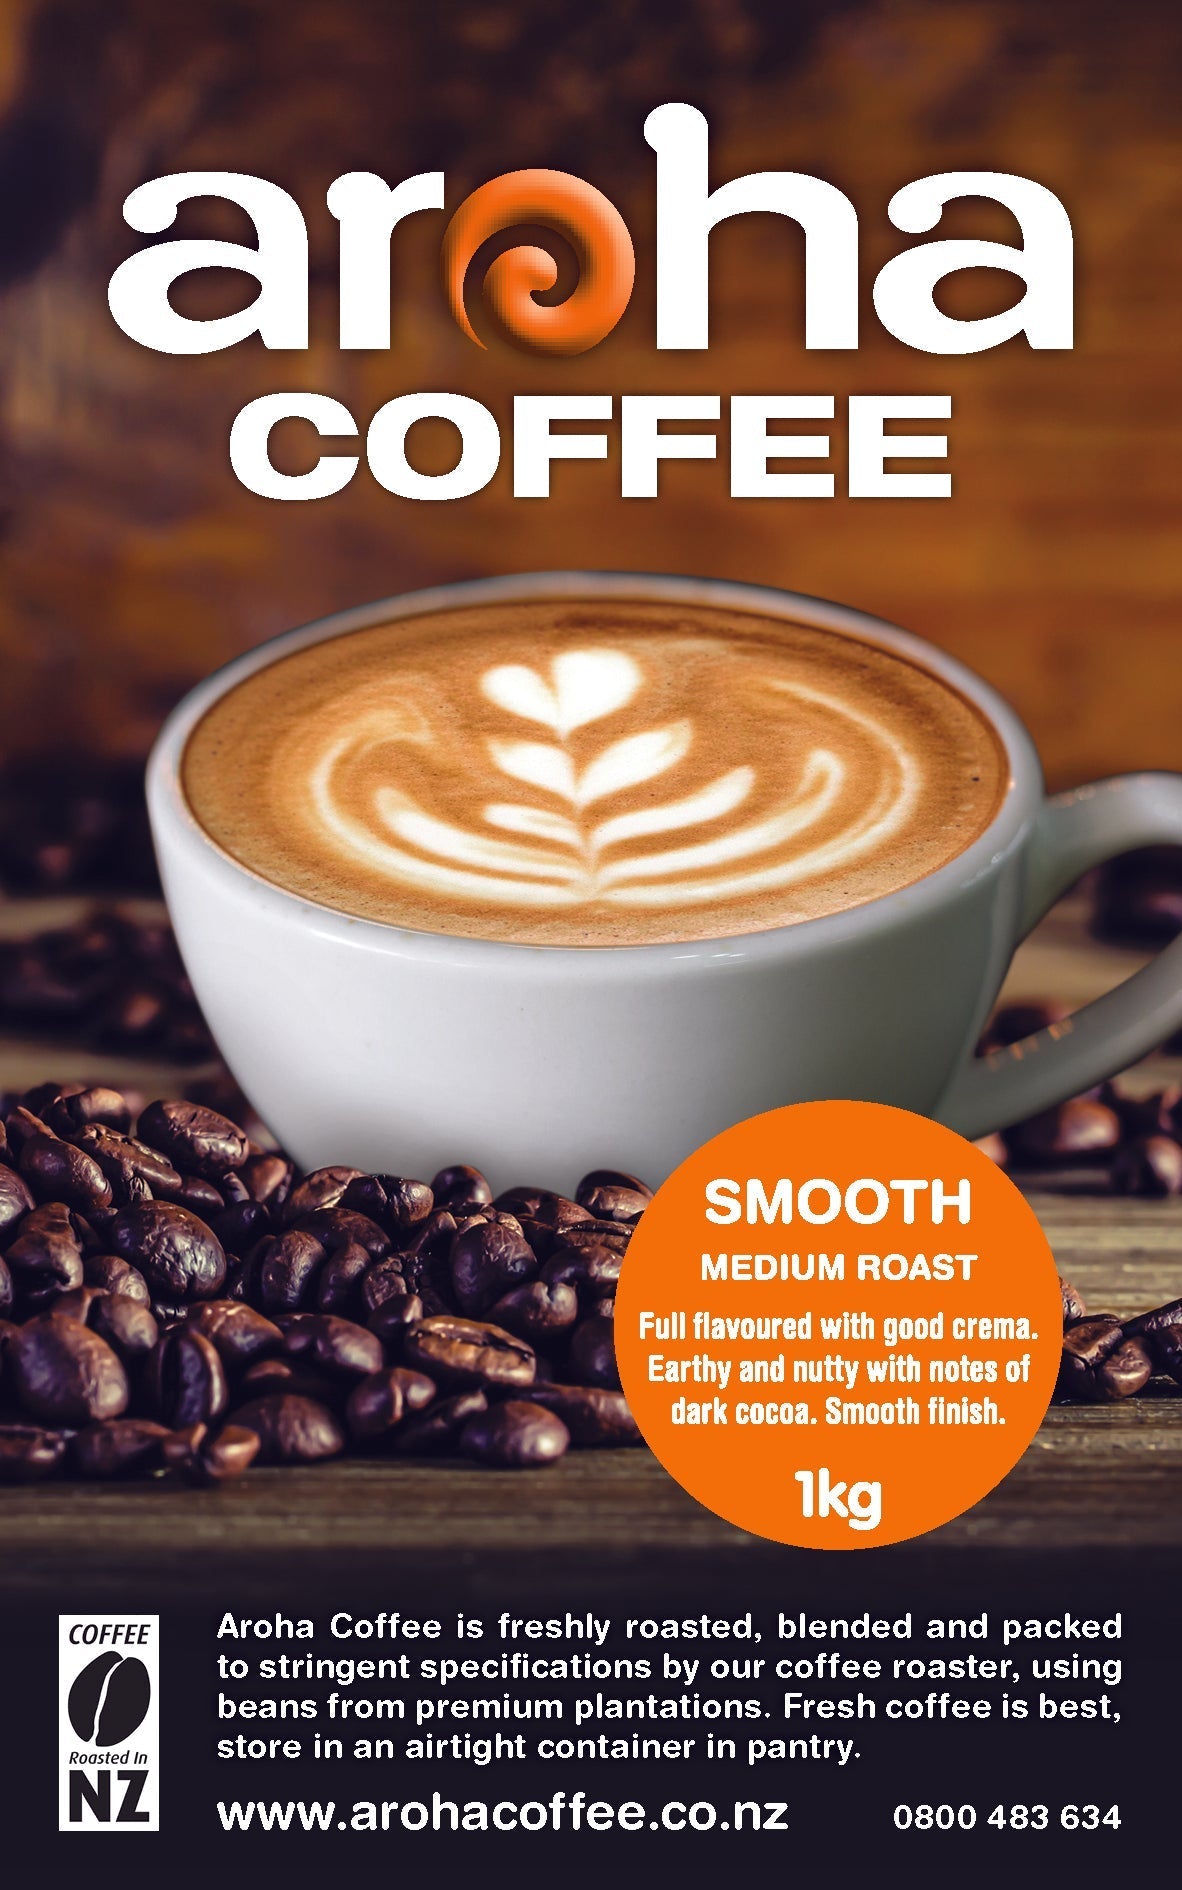  "A close-up image of a 1kg bag of Aroha Smooth roasted coffee beans, featuring a rich blend of dark and medium brown hues, with the brand name prominently displayed and a captivating aroma wafting from the freshly roasted beans."